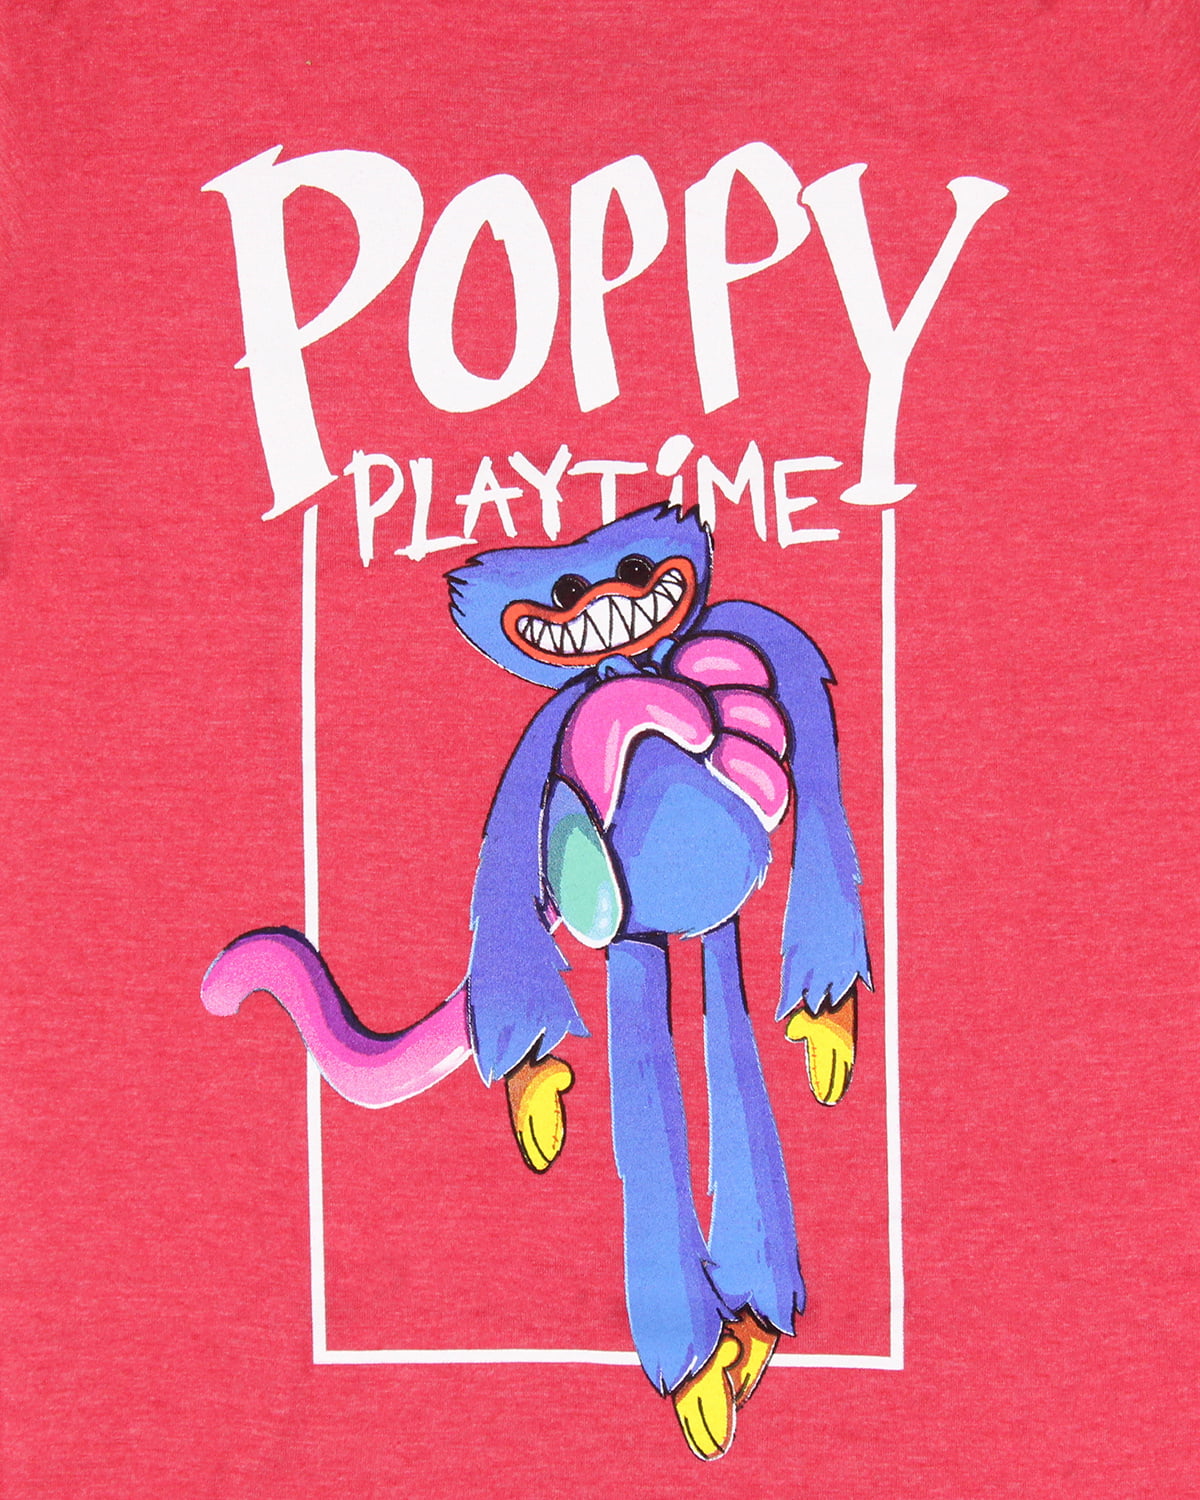 PlayTime C.O. - Posters of the Game : r/PoppyPlaytime